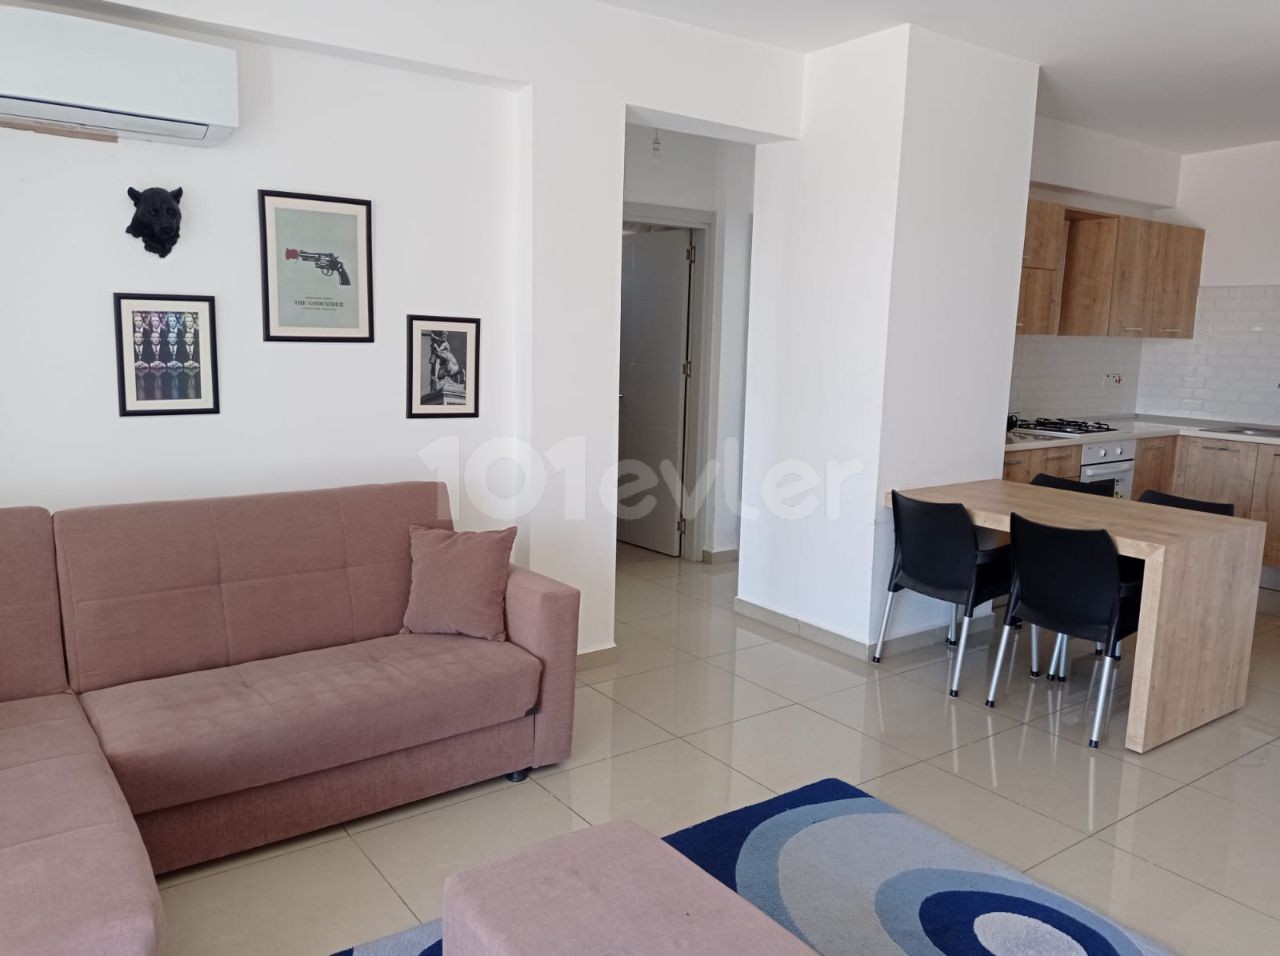 Fully furnished 2 + 1 apartment for rent in Gönyeli central location. (It will be available on March 6.)